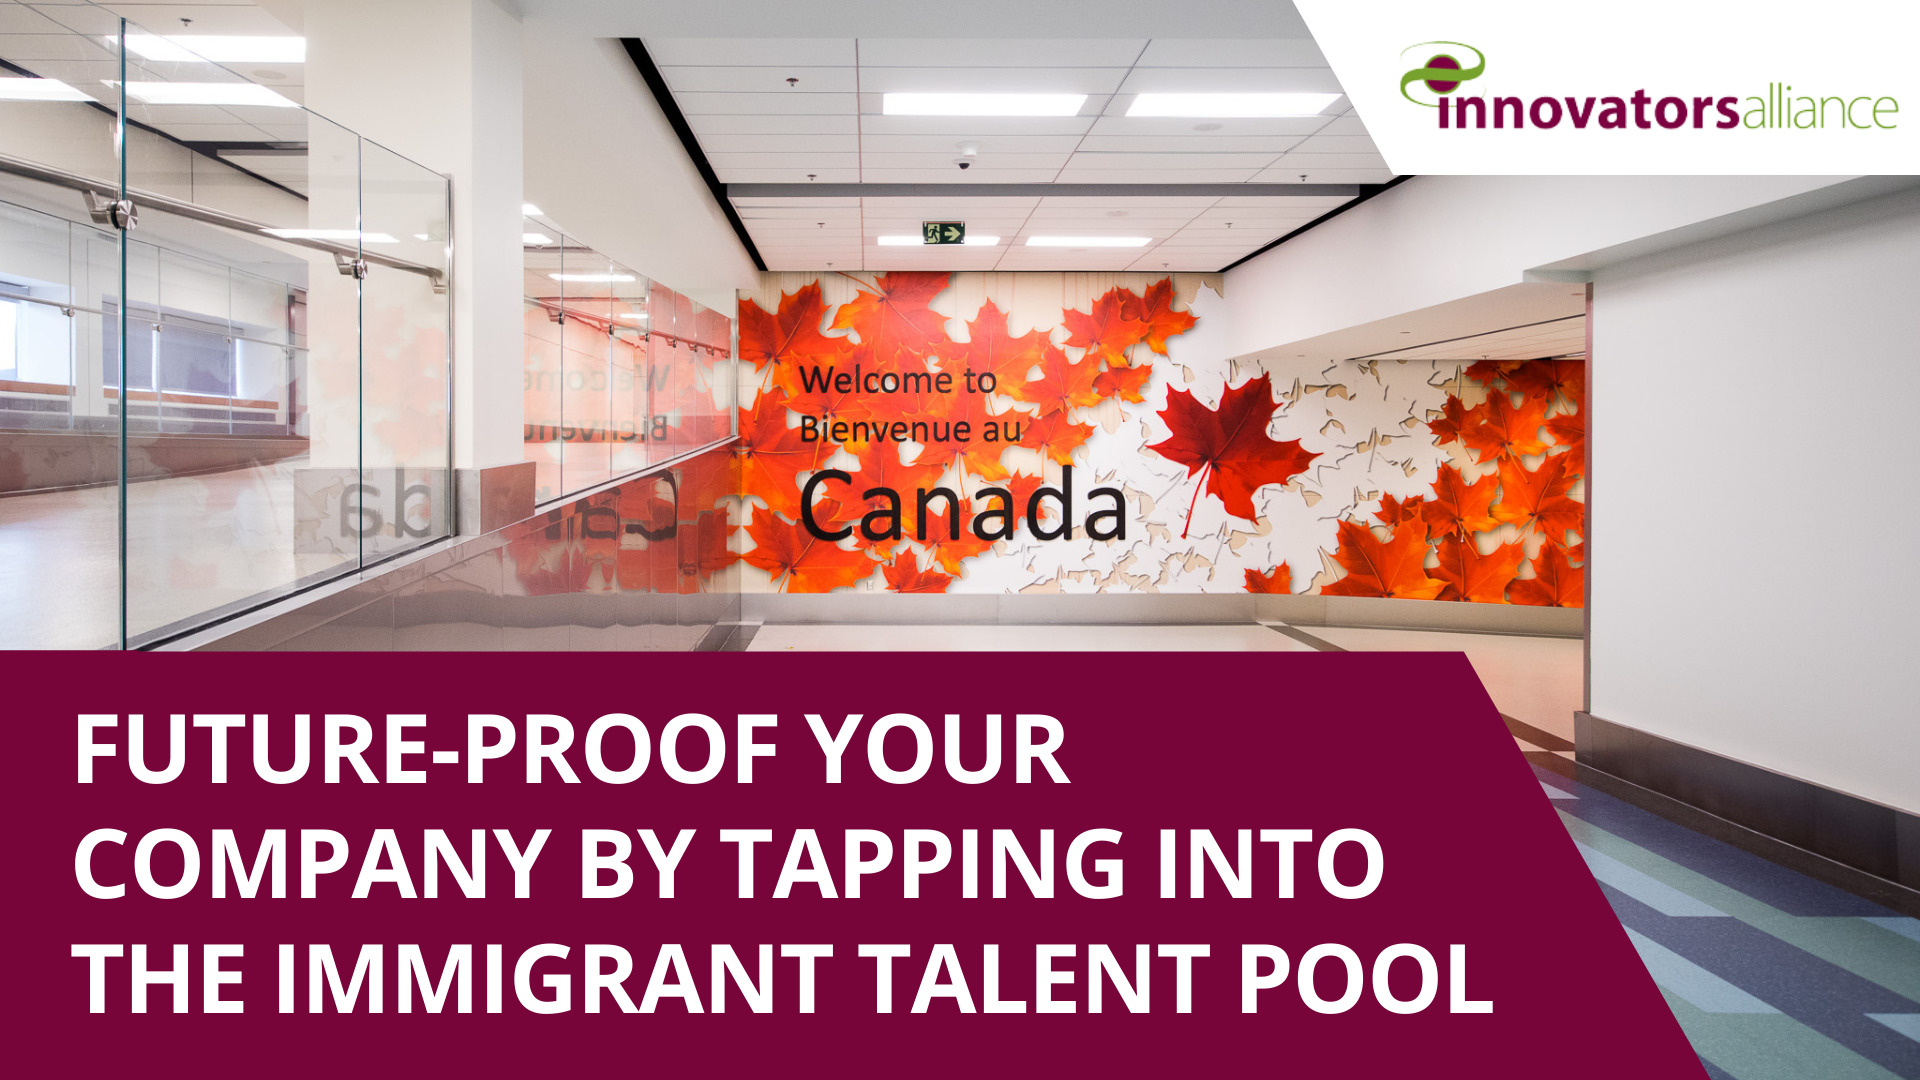 Make your company future-proof by using the Immigrant Talent Pool